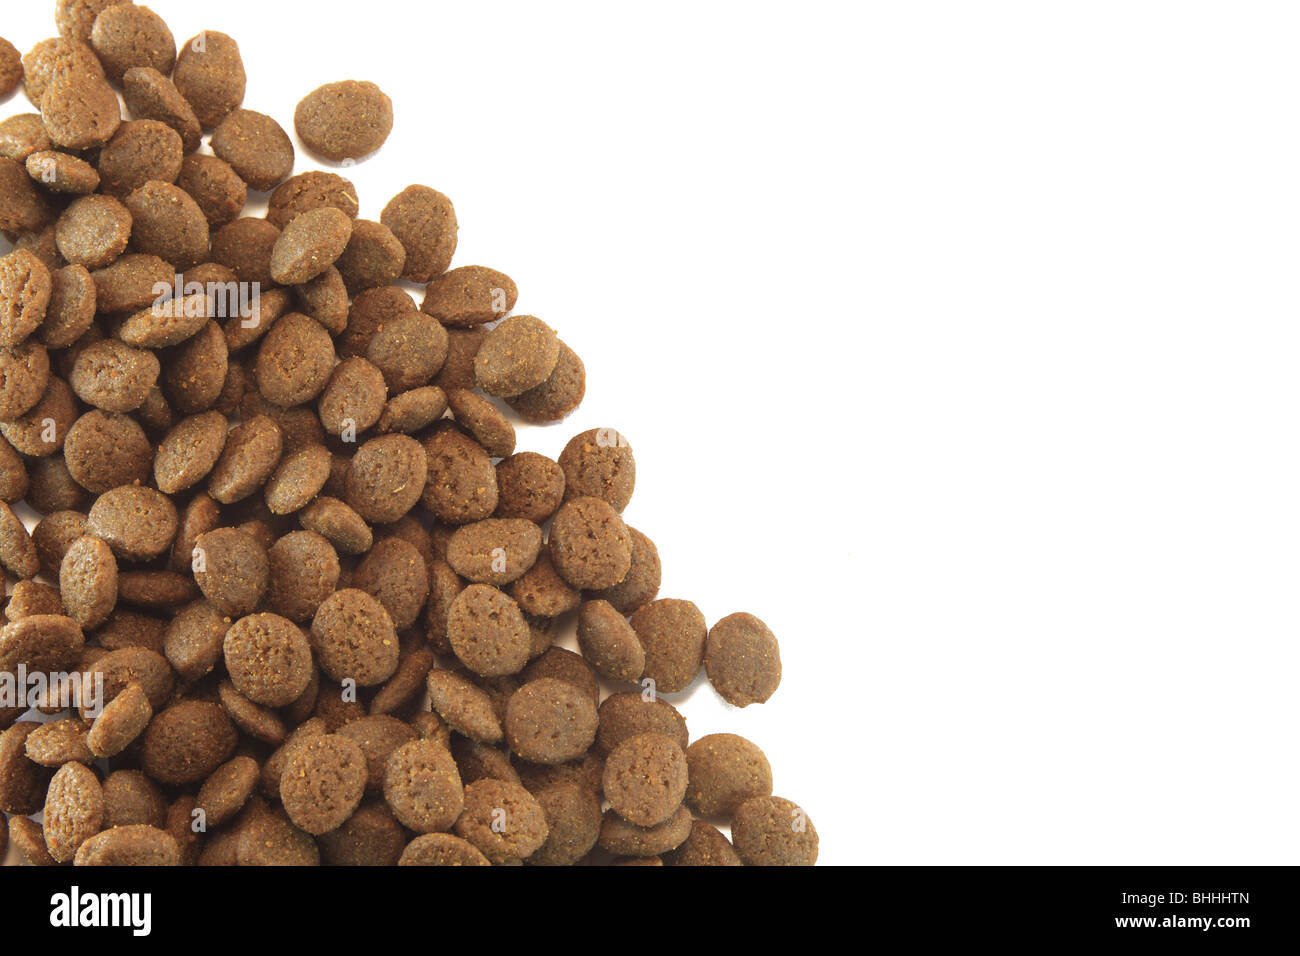 texture of dog or cat food Stock Photo